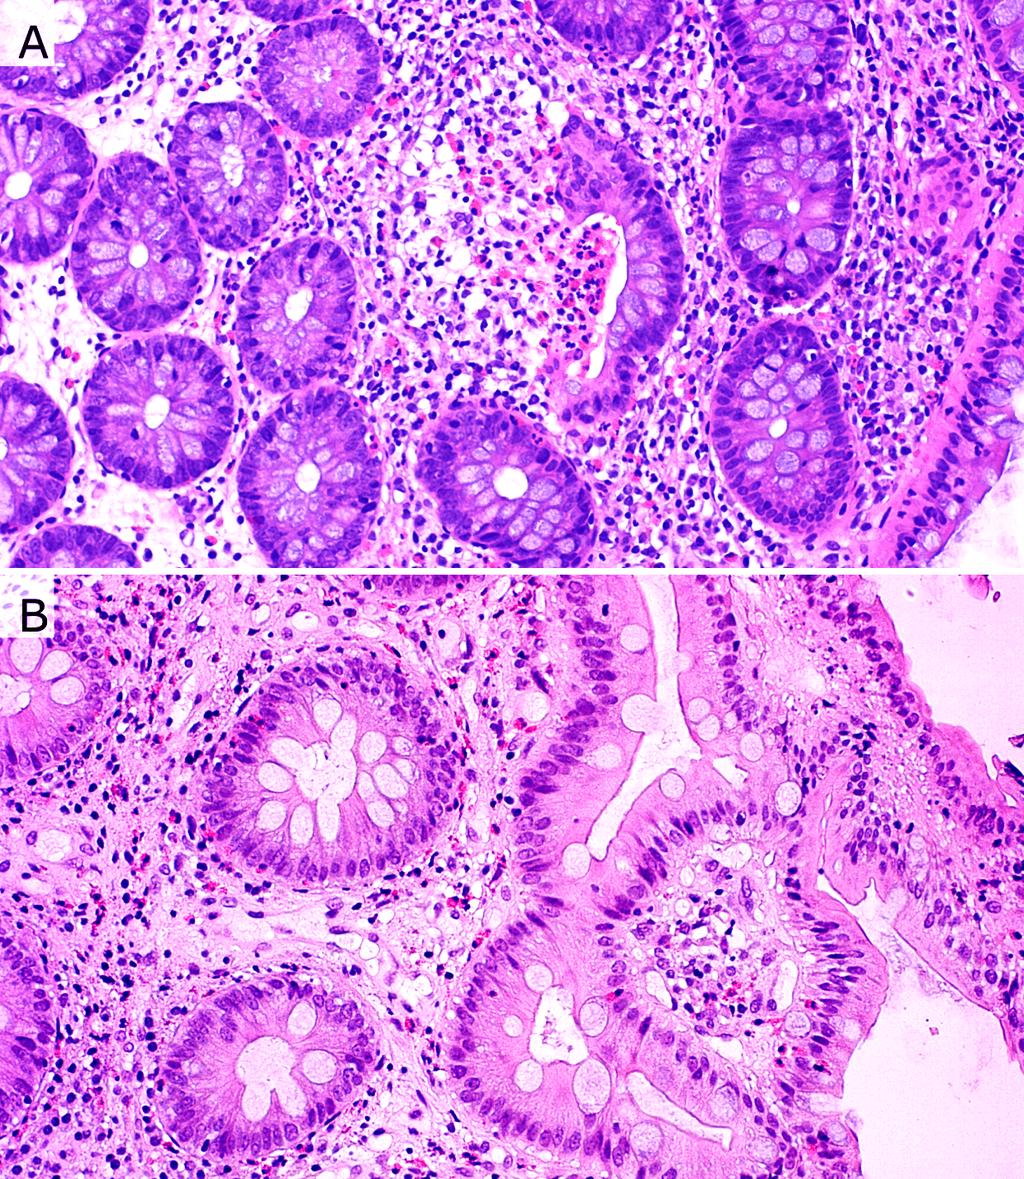 Cristin Díz Del Arco et l. 786 nd extensive eosinophil degrnultion. Lymphoid folliculr hyperplsi ws detected more frequently in cses with men number of 40 eosinophils per HPF.